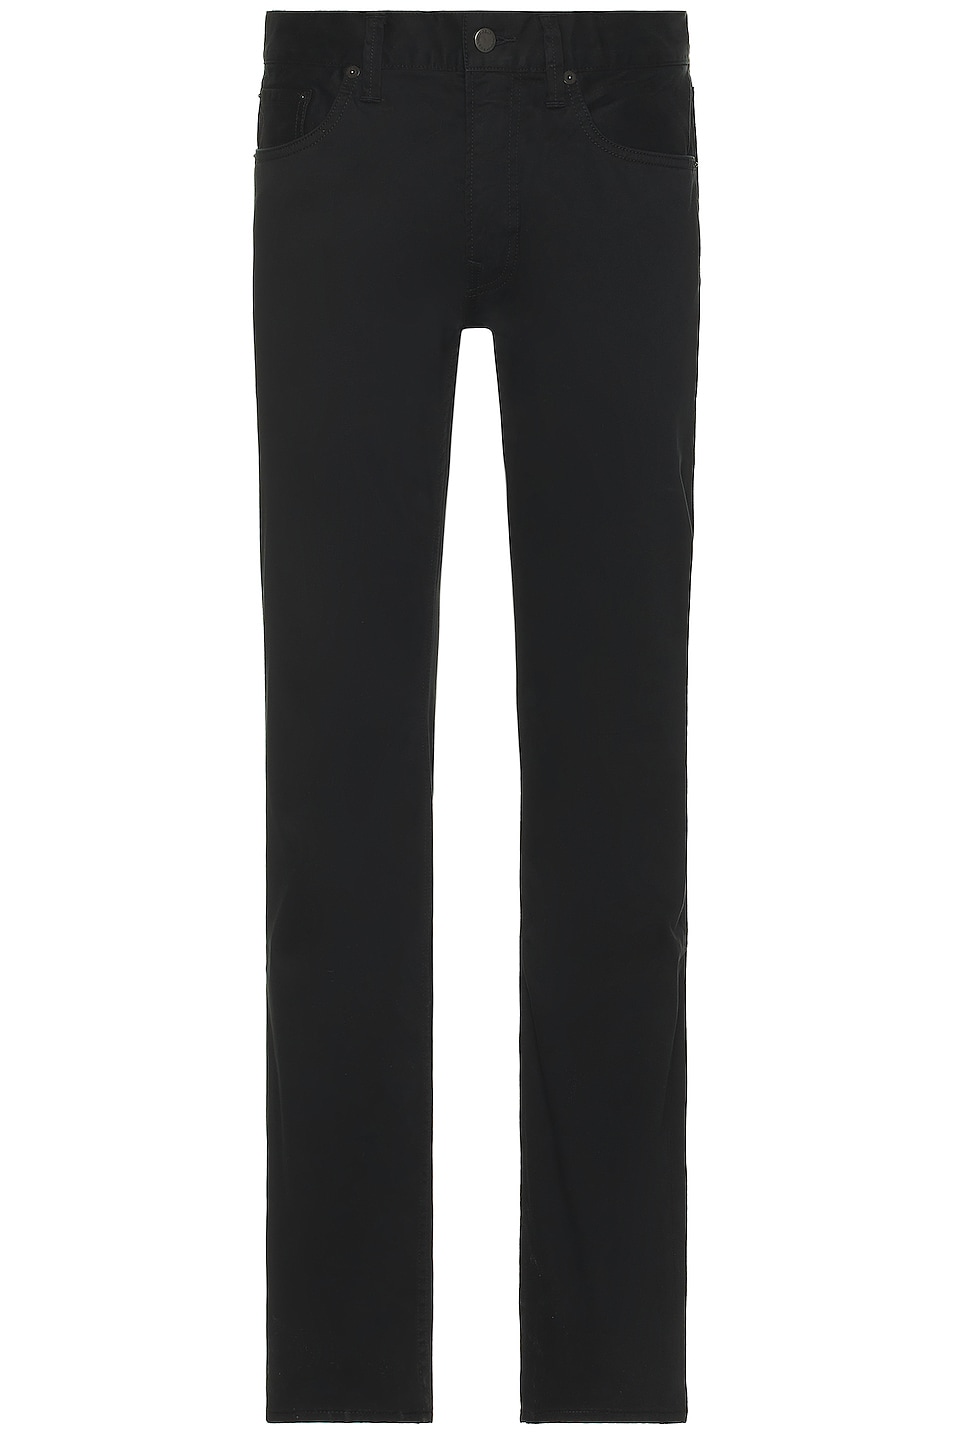 Image 1 of Polo Ralph Lauren 5 Pocket Sateen Chino Pant in Polo Black